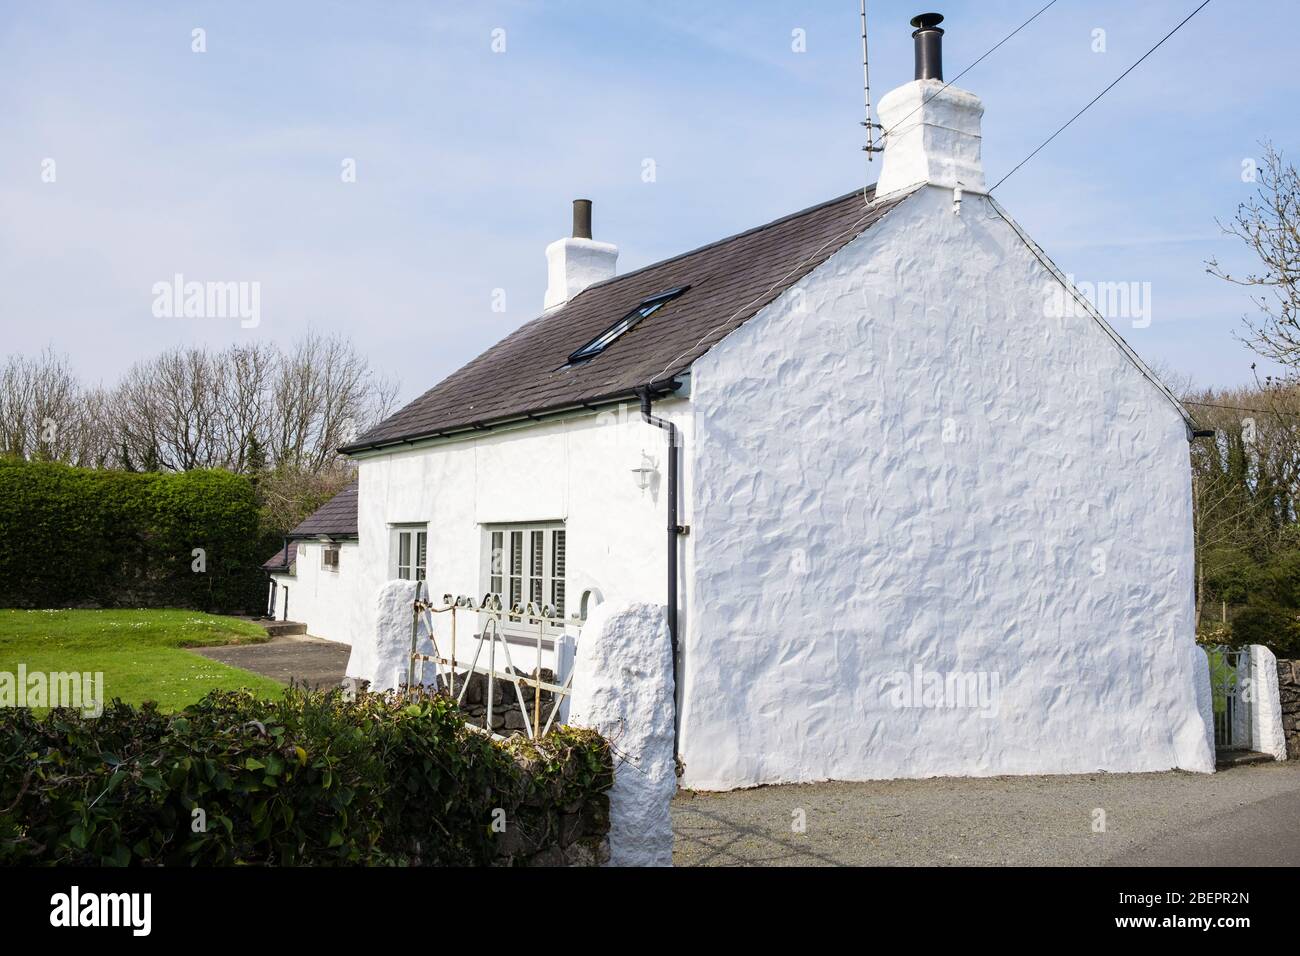 Welsh whitewashed old country cottage with traditional slate roof. Brynteg, Benllech, Isle of Anglesey, Wales, UK, Britain Stock Photo